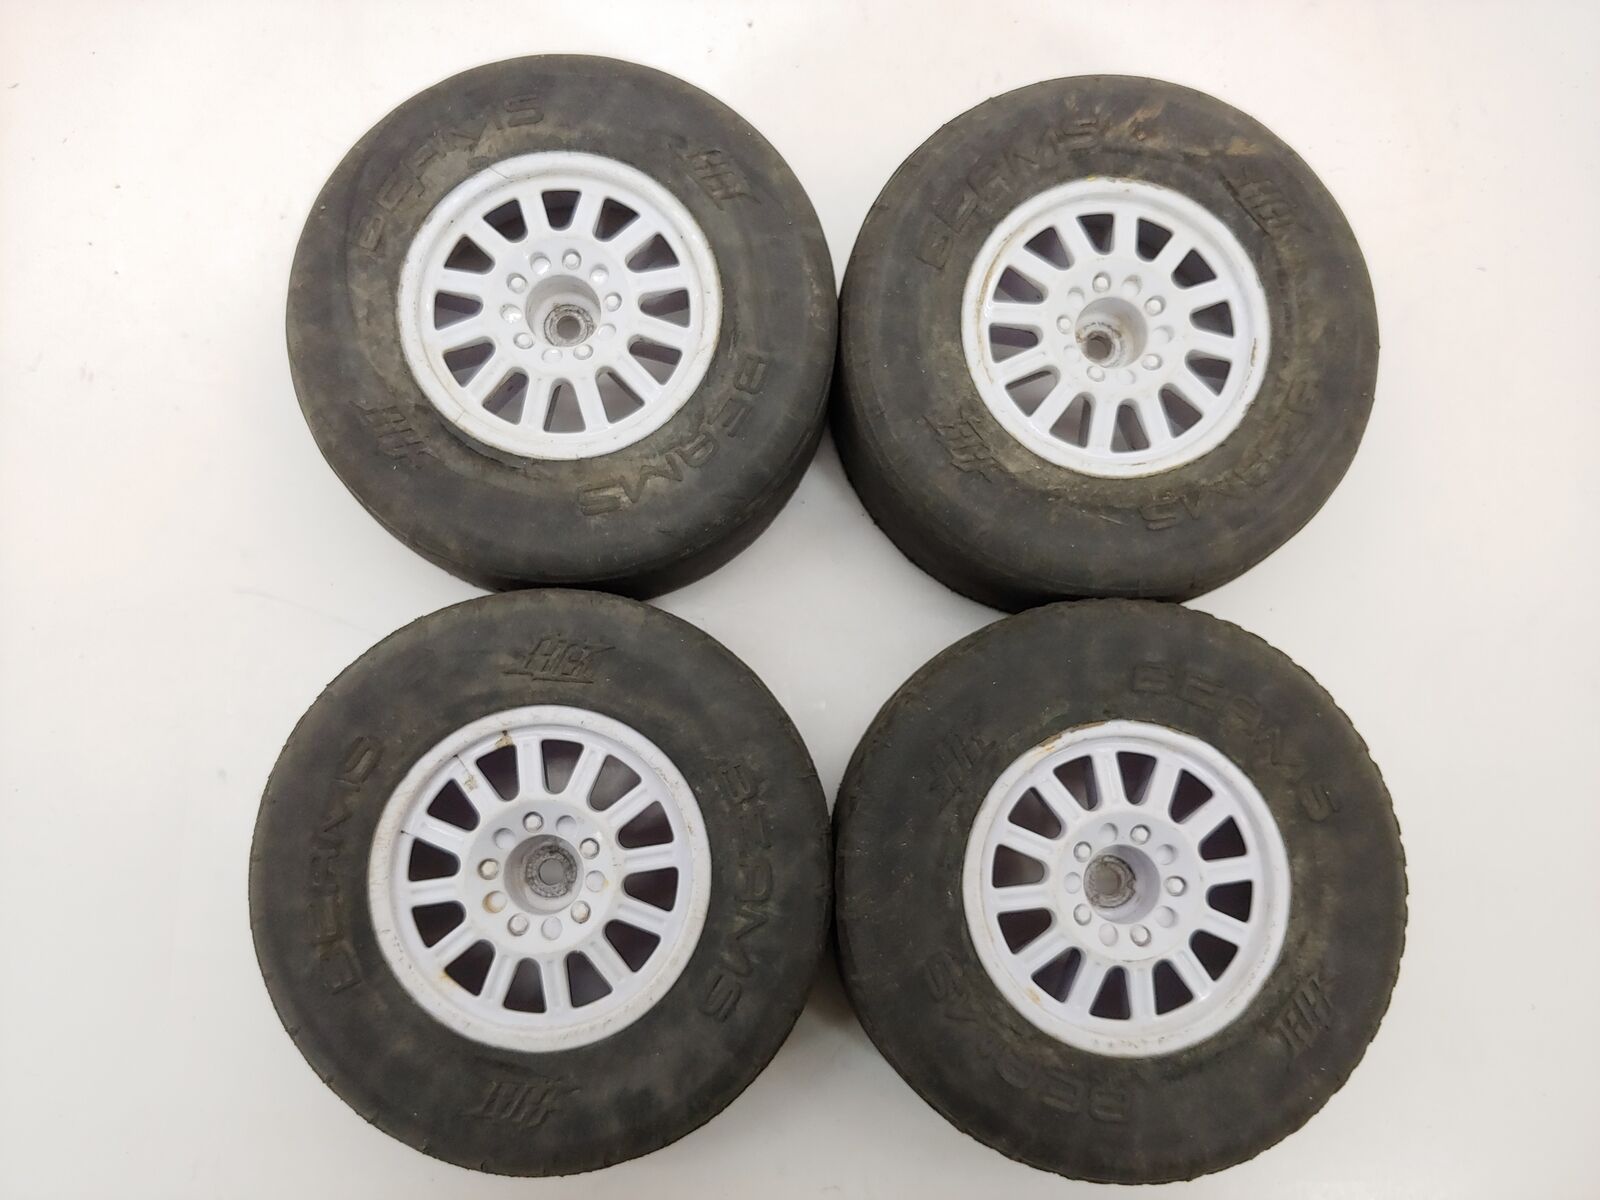 *BALD* 4x Hot Bodies Beams 1/10 Short Course Truck Tires on 12mm Hex Wheels Use